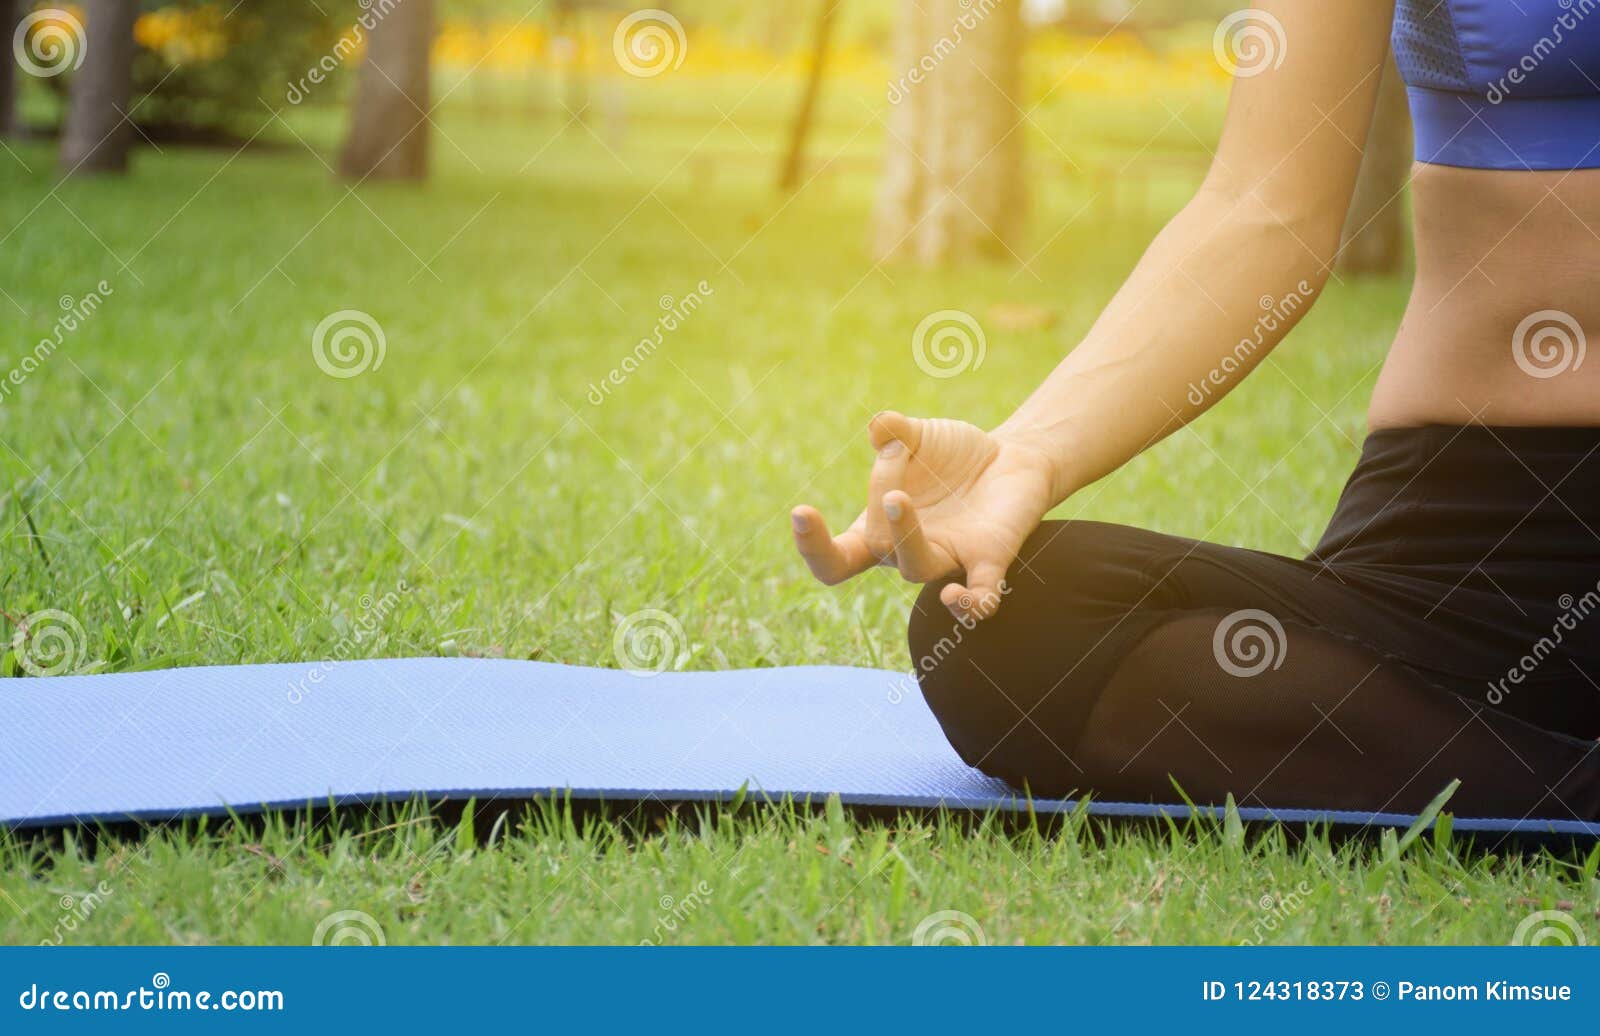 young woman practicing yoga in the park, stretching and flexibility, practiced for health and relaxation